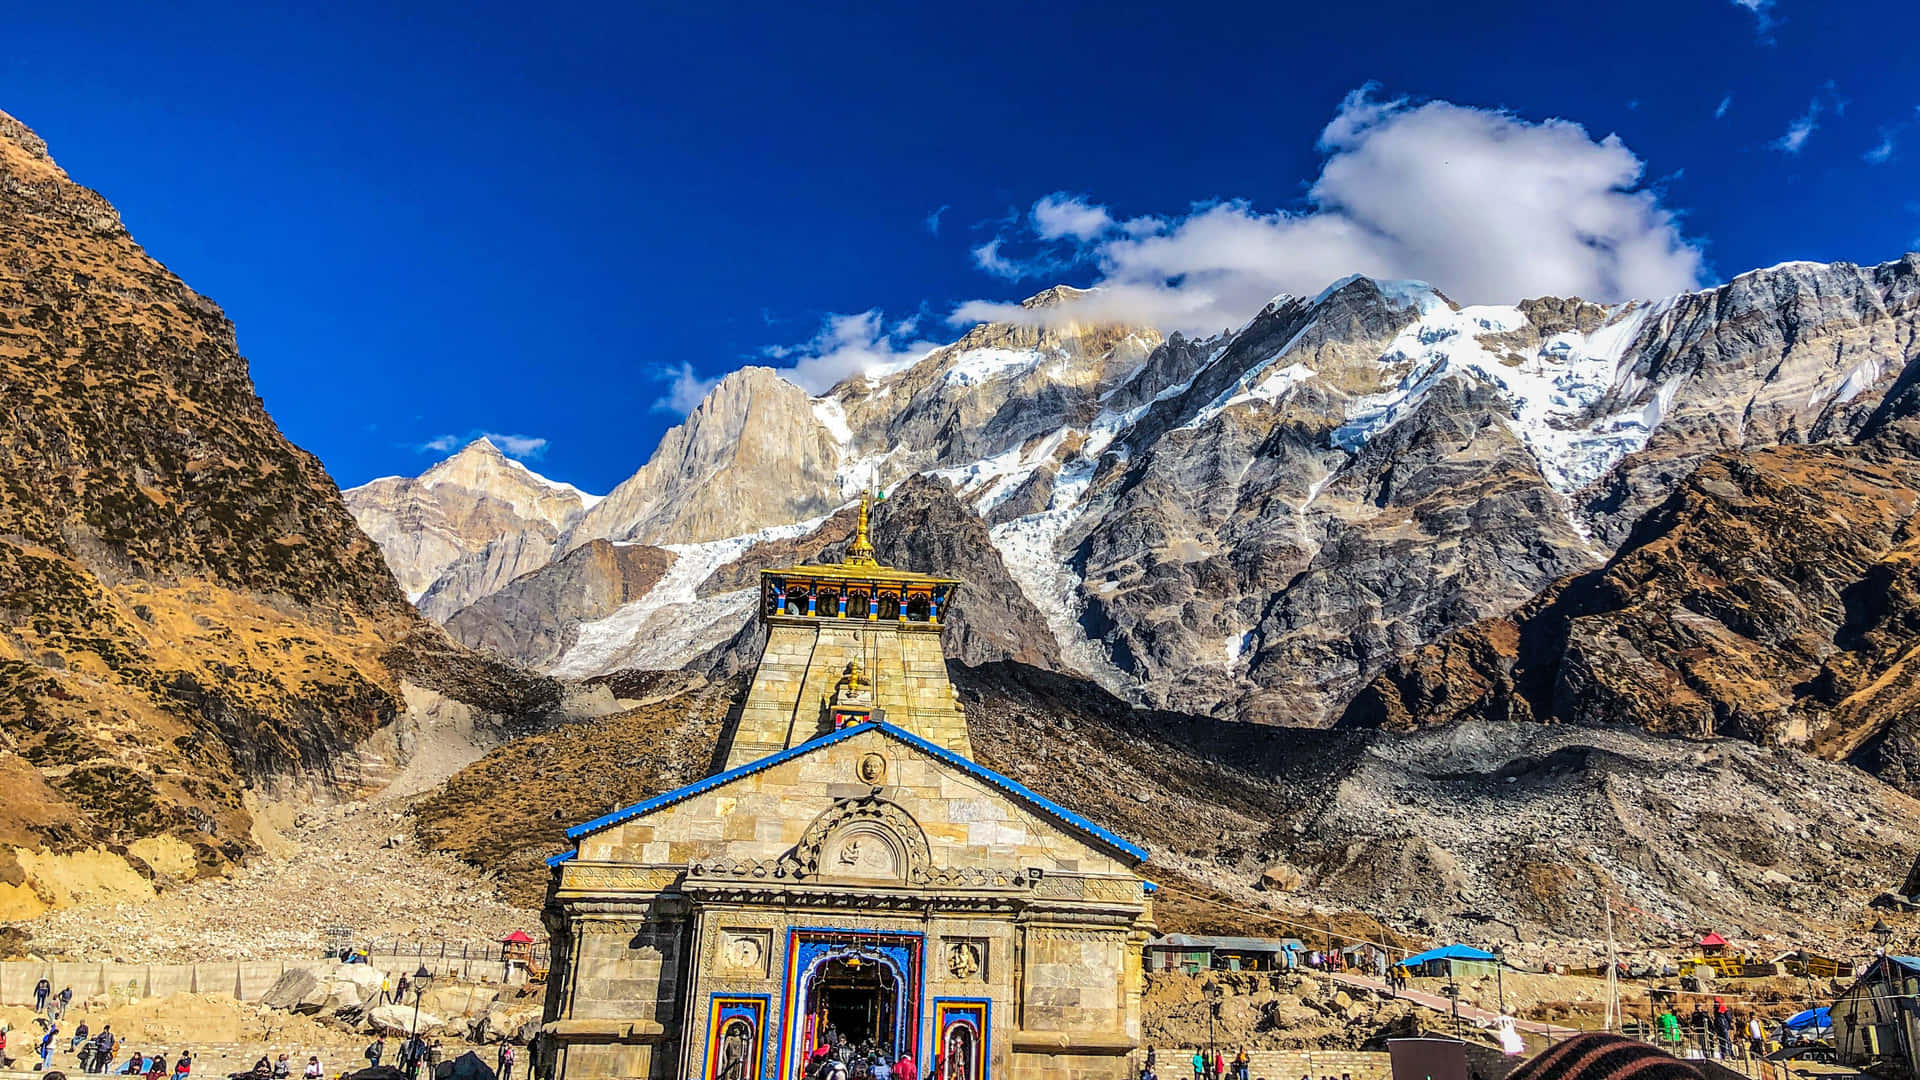 Visit the famous Kedarnath to take in the beautiful Himalayan landscape.